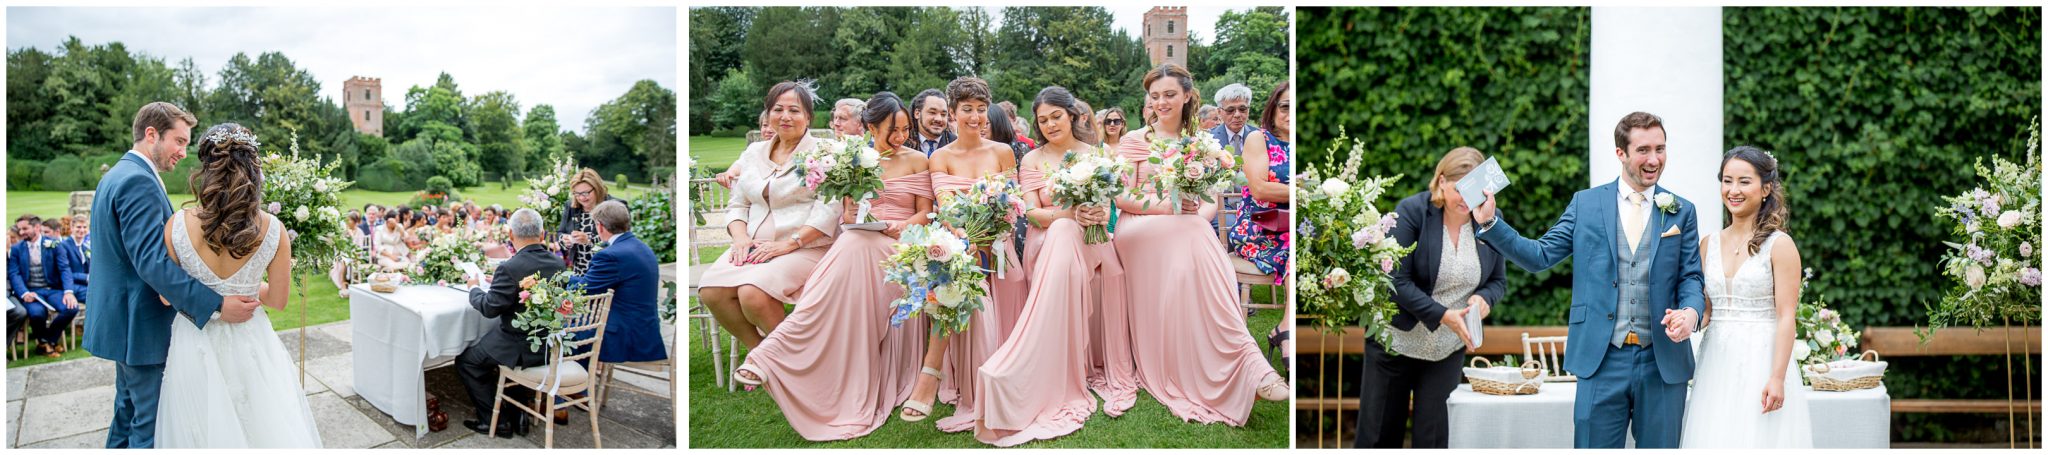 Candid photograph of bridesmaids watching the signing of the register